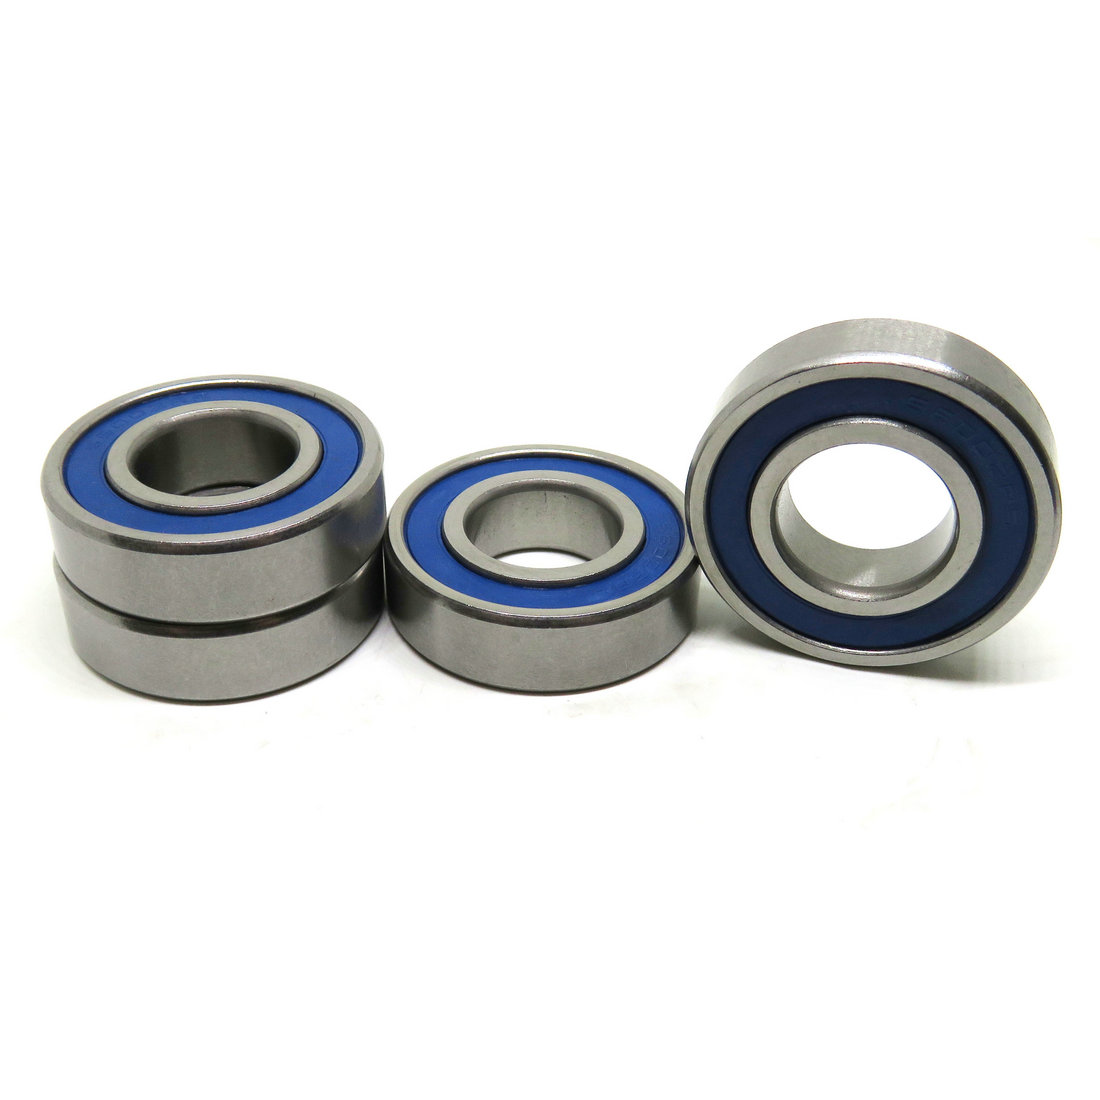 SS6005-2RS Stainless Steel Ball Bearing 25x47x12 S6005-2RS AISI 440C Radial Bearing Resistant to Corrosion and High Temperatures.jpg